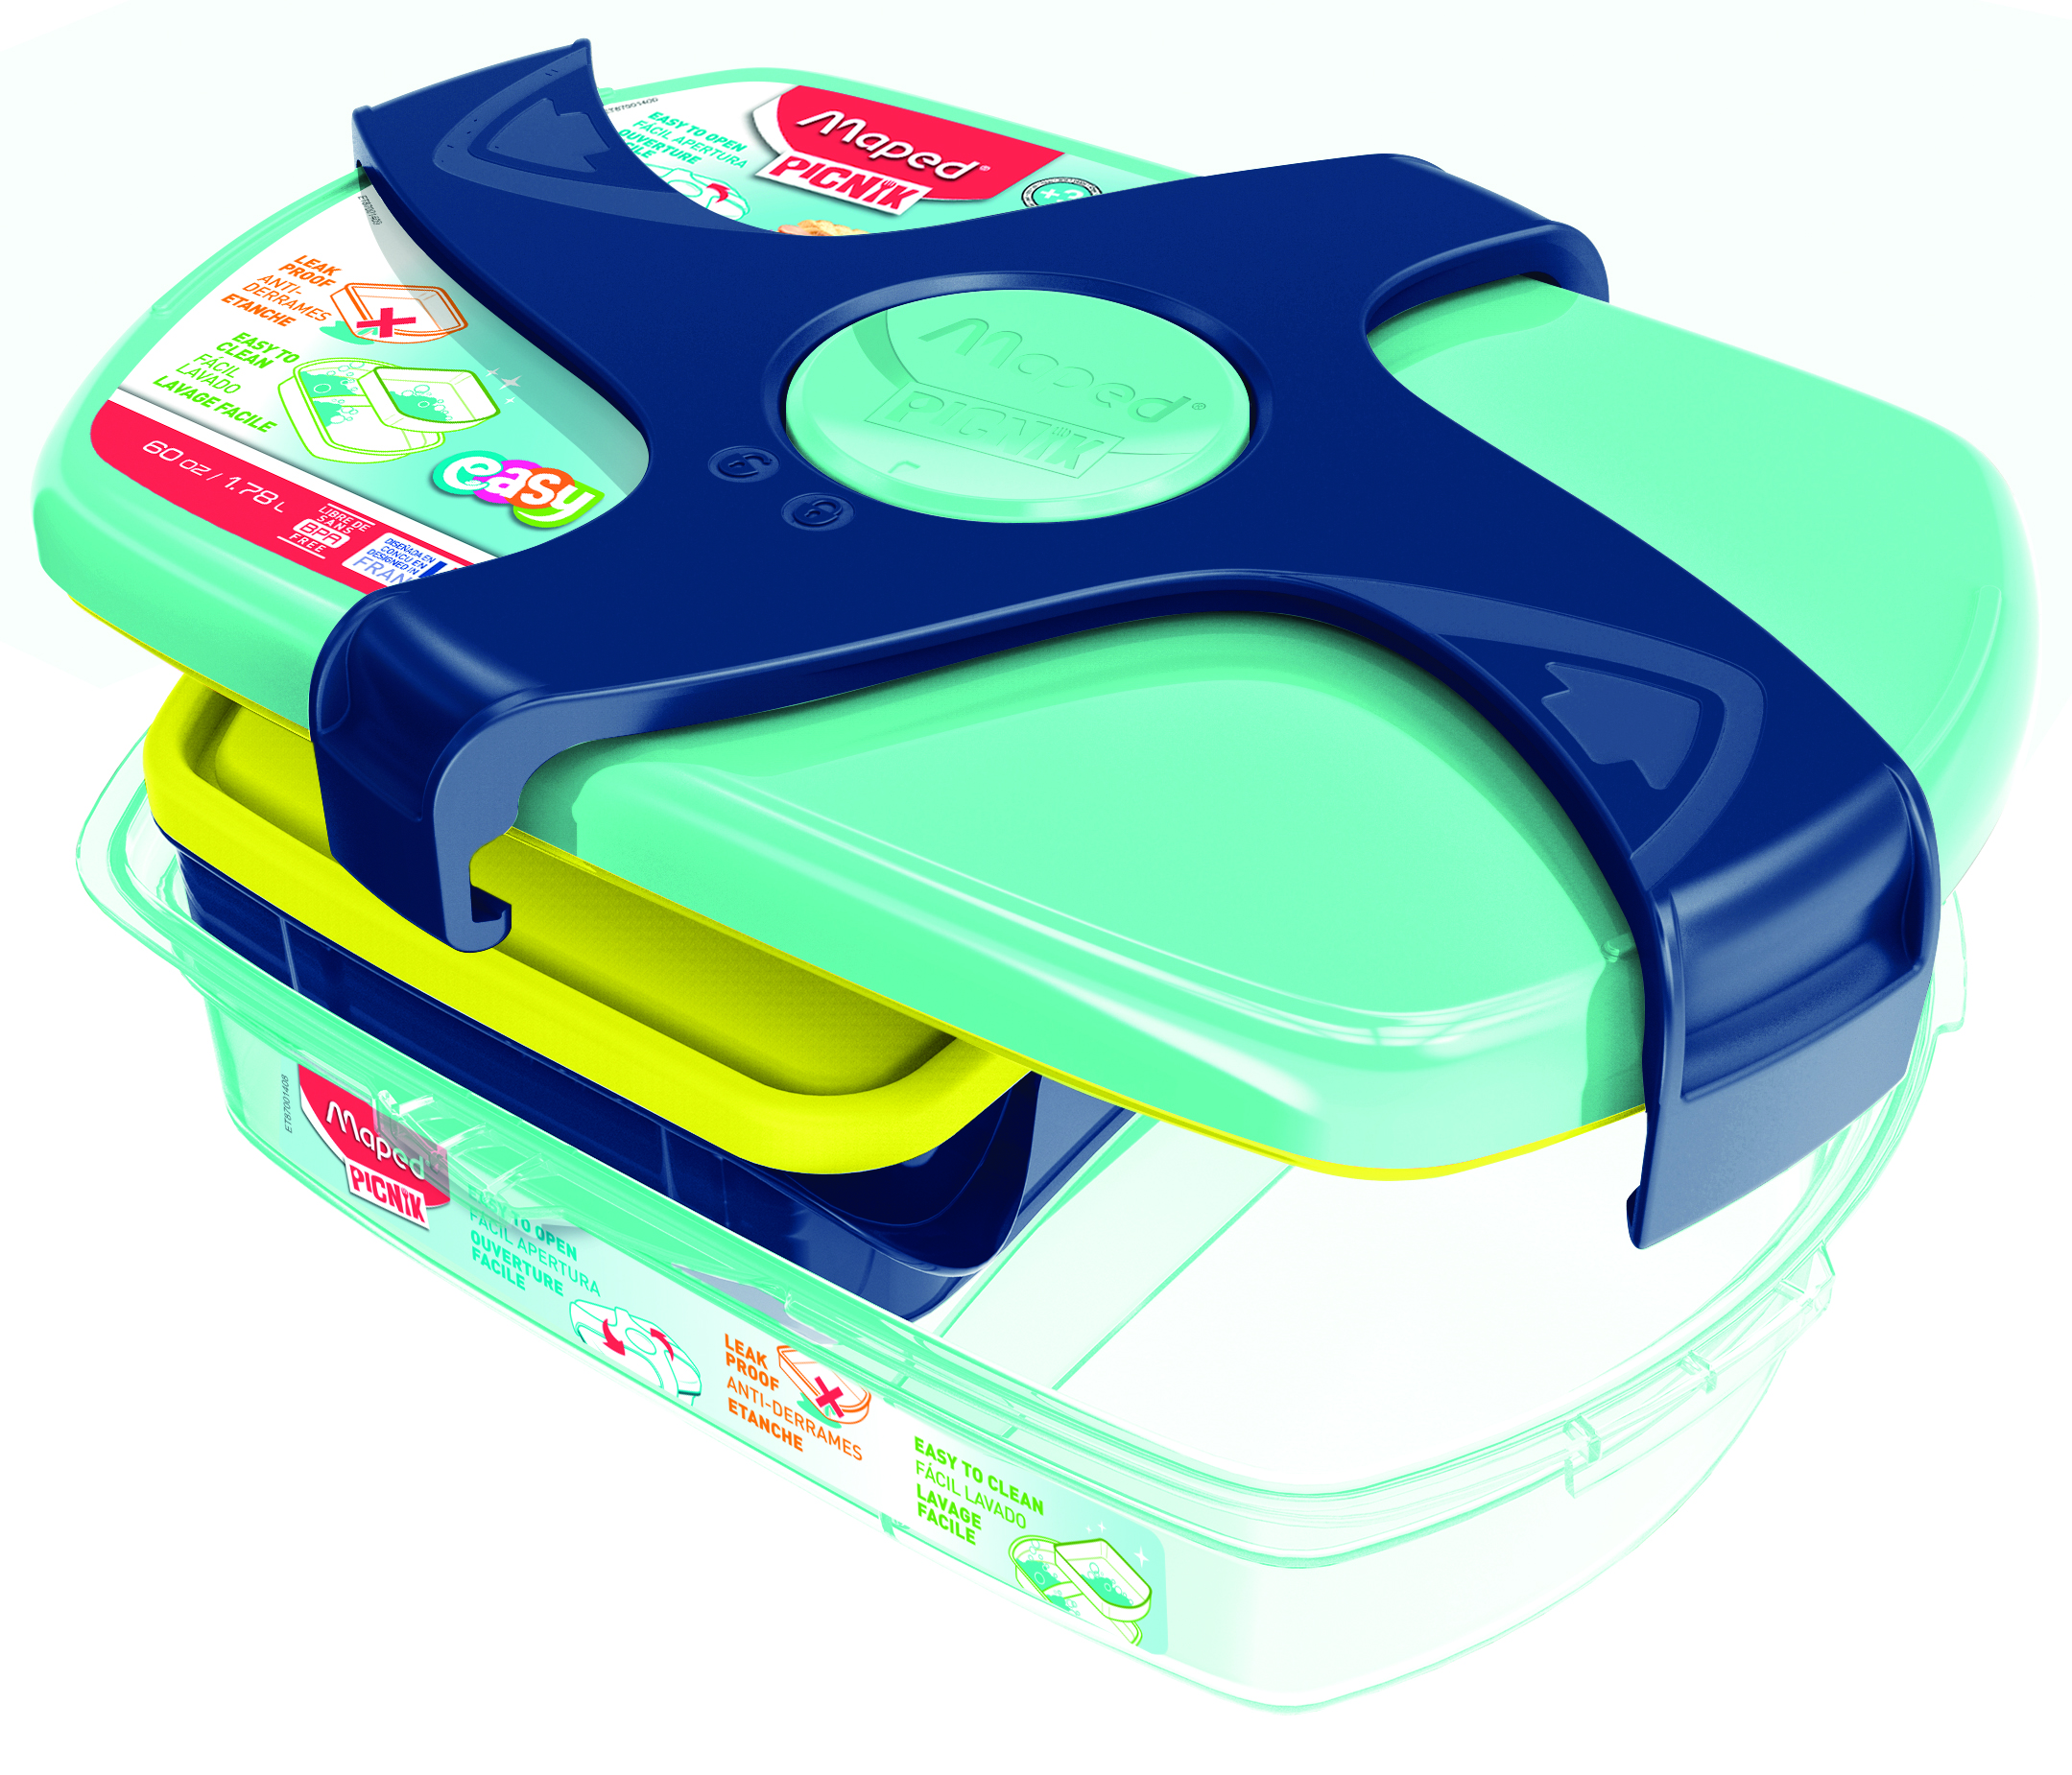 MAPED CONCEPT LUNCH BOX BLUE / GREEN 1.7L REF 870017